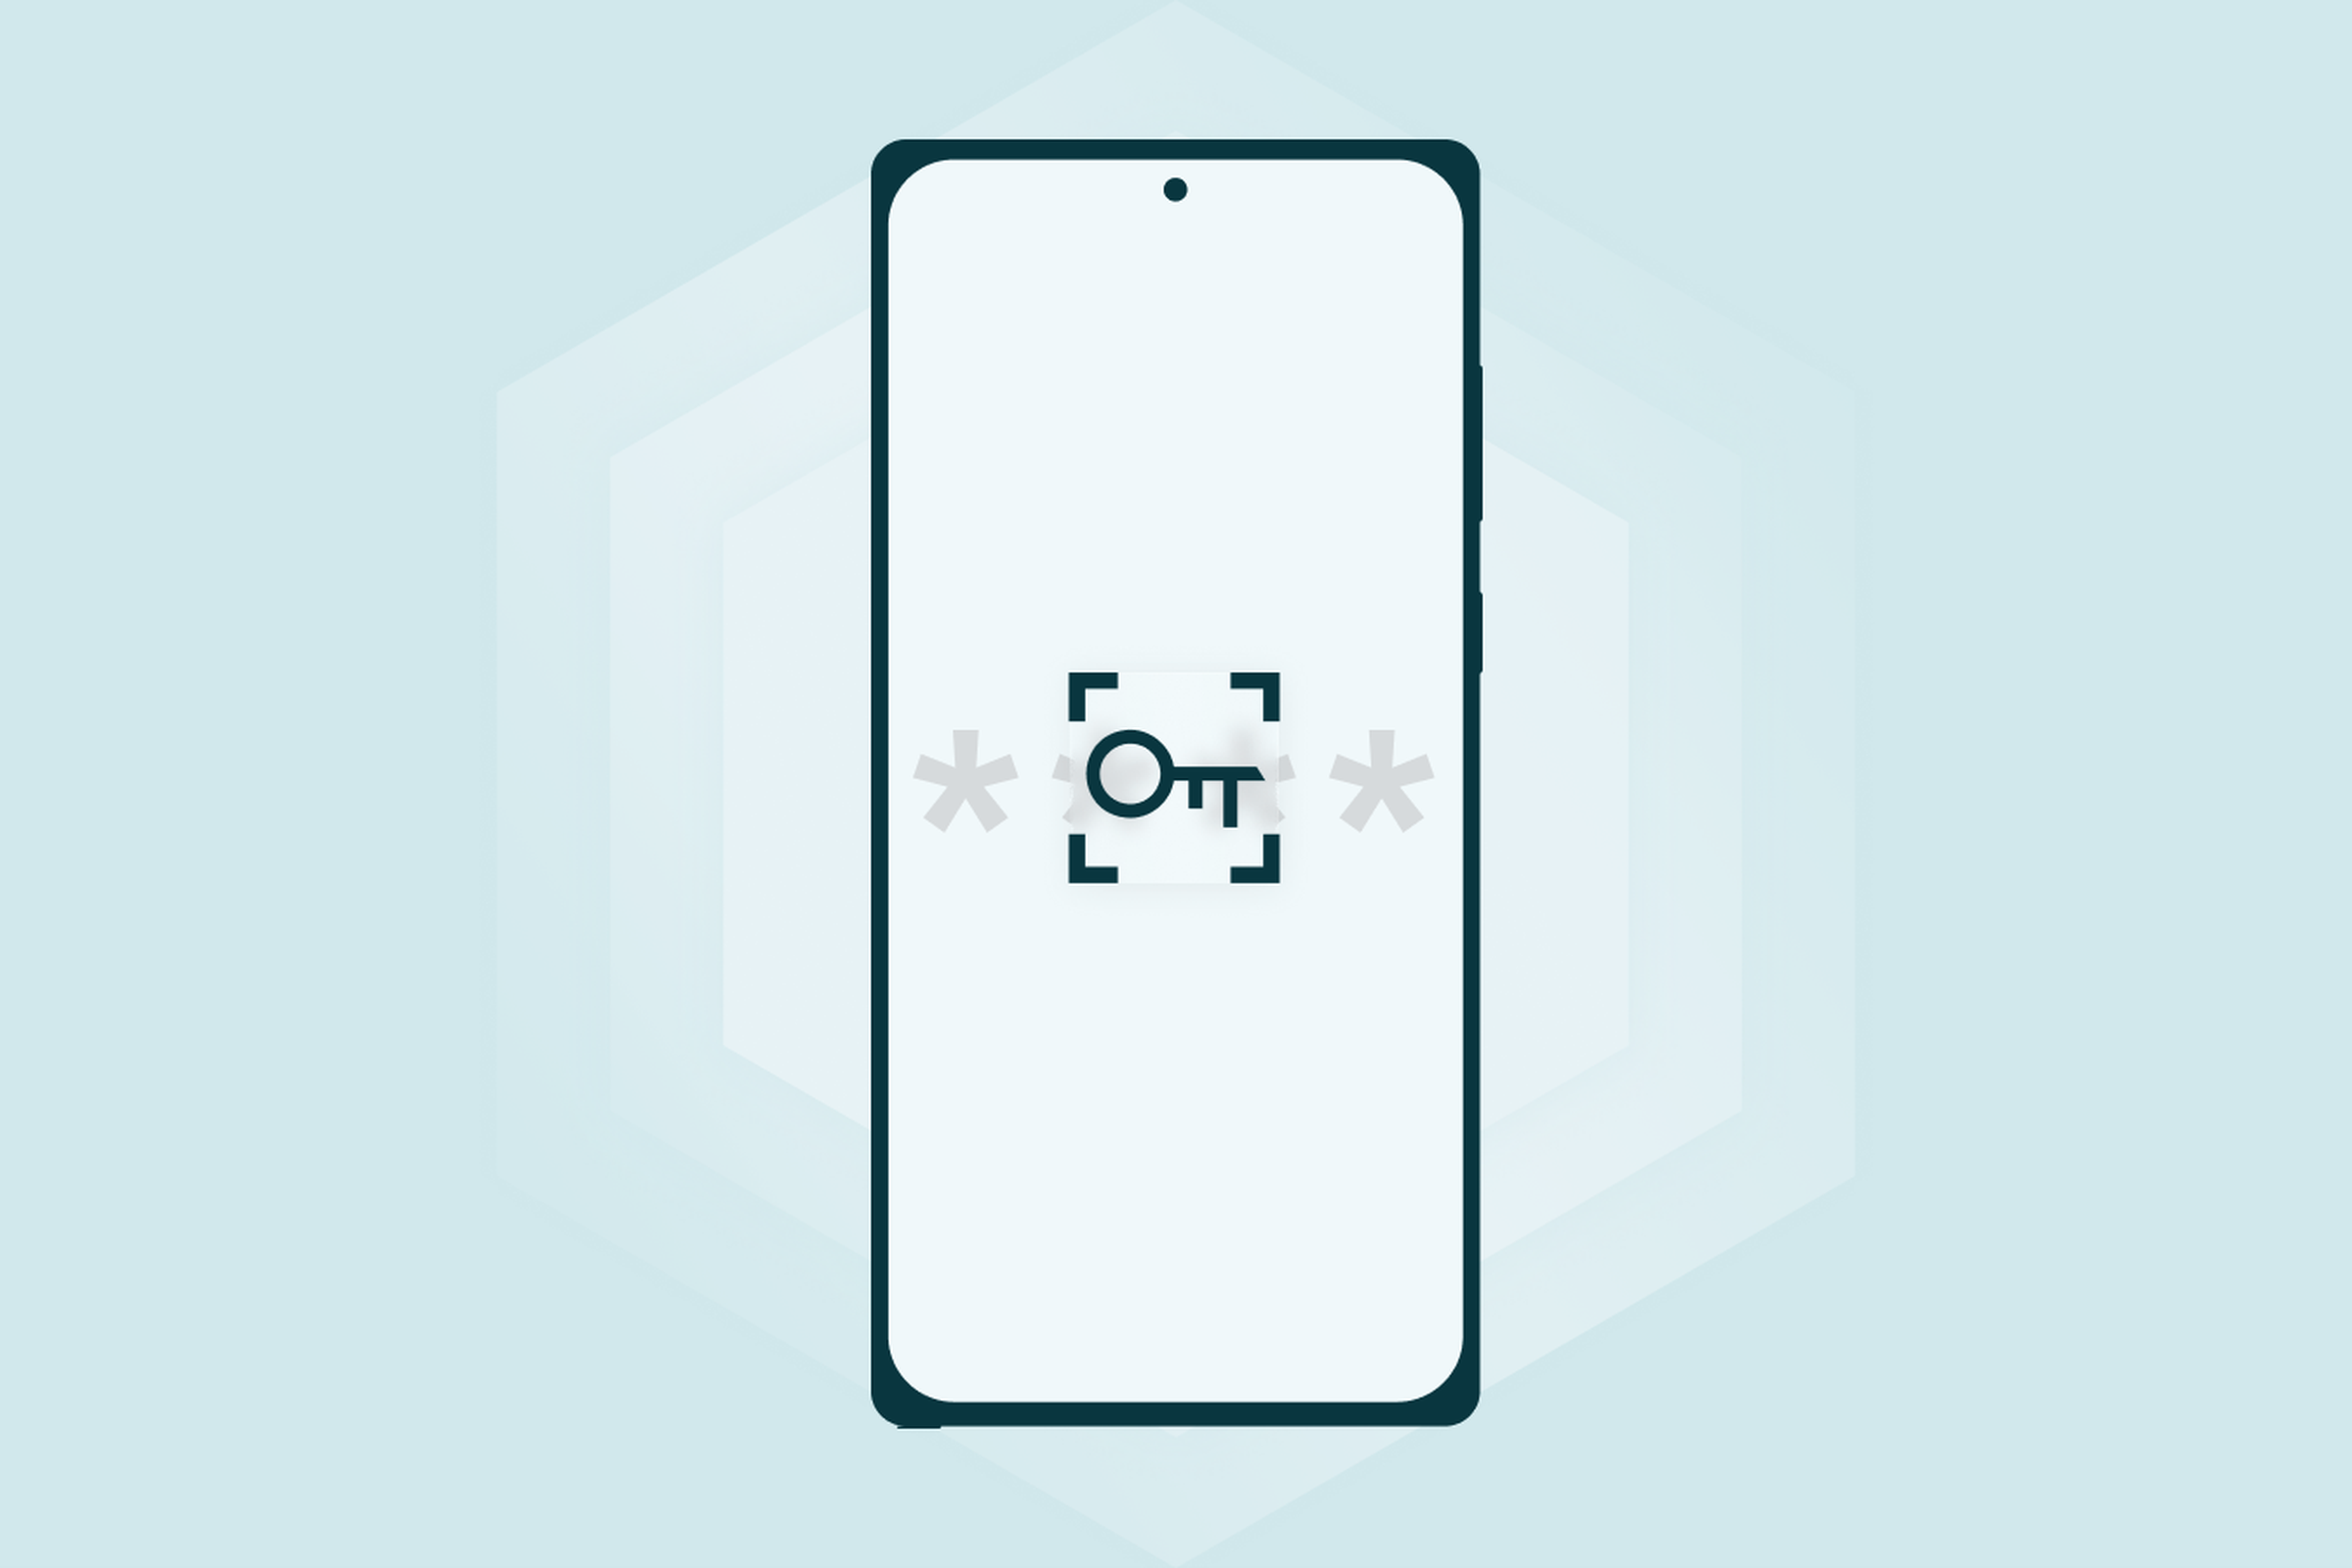 A vector silhouette of an Android phone with a hole-punched camera and a key icon in the middle.